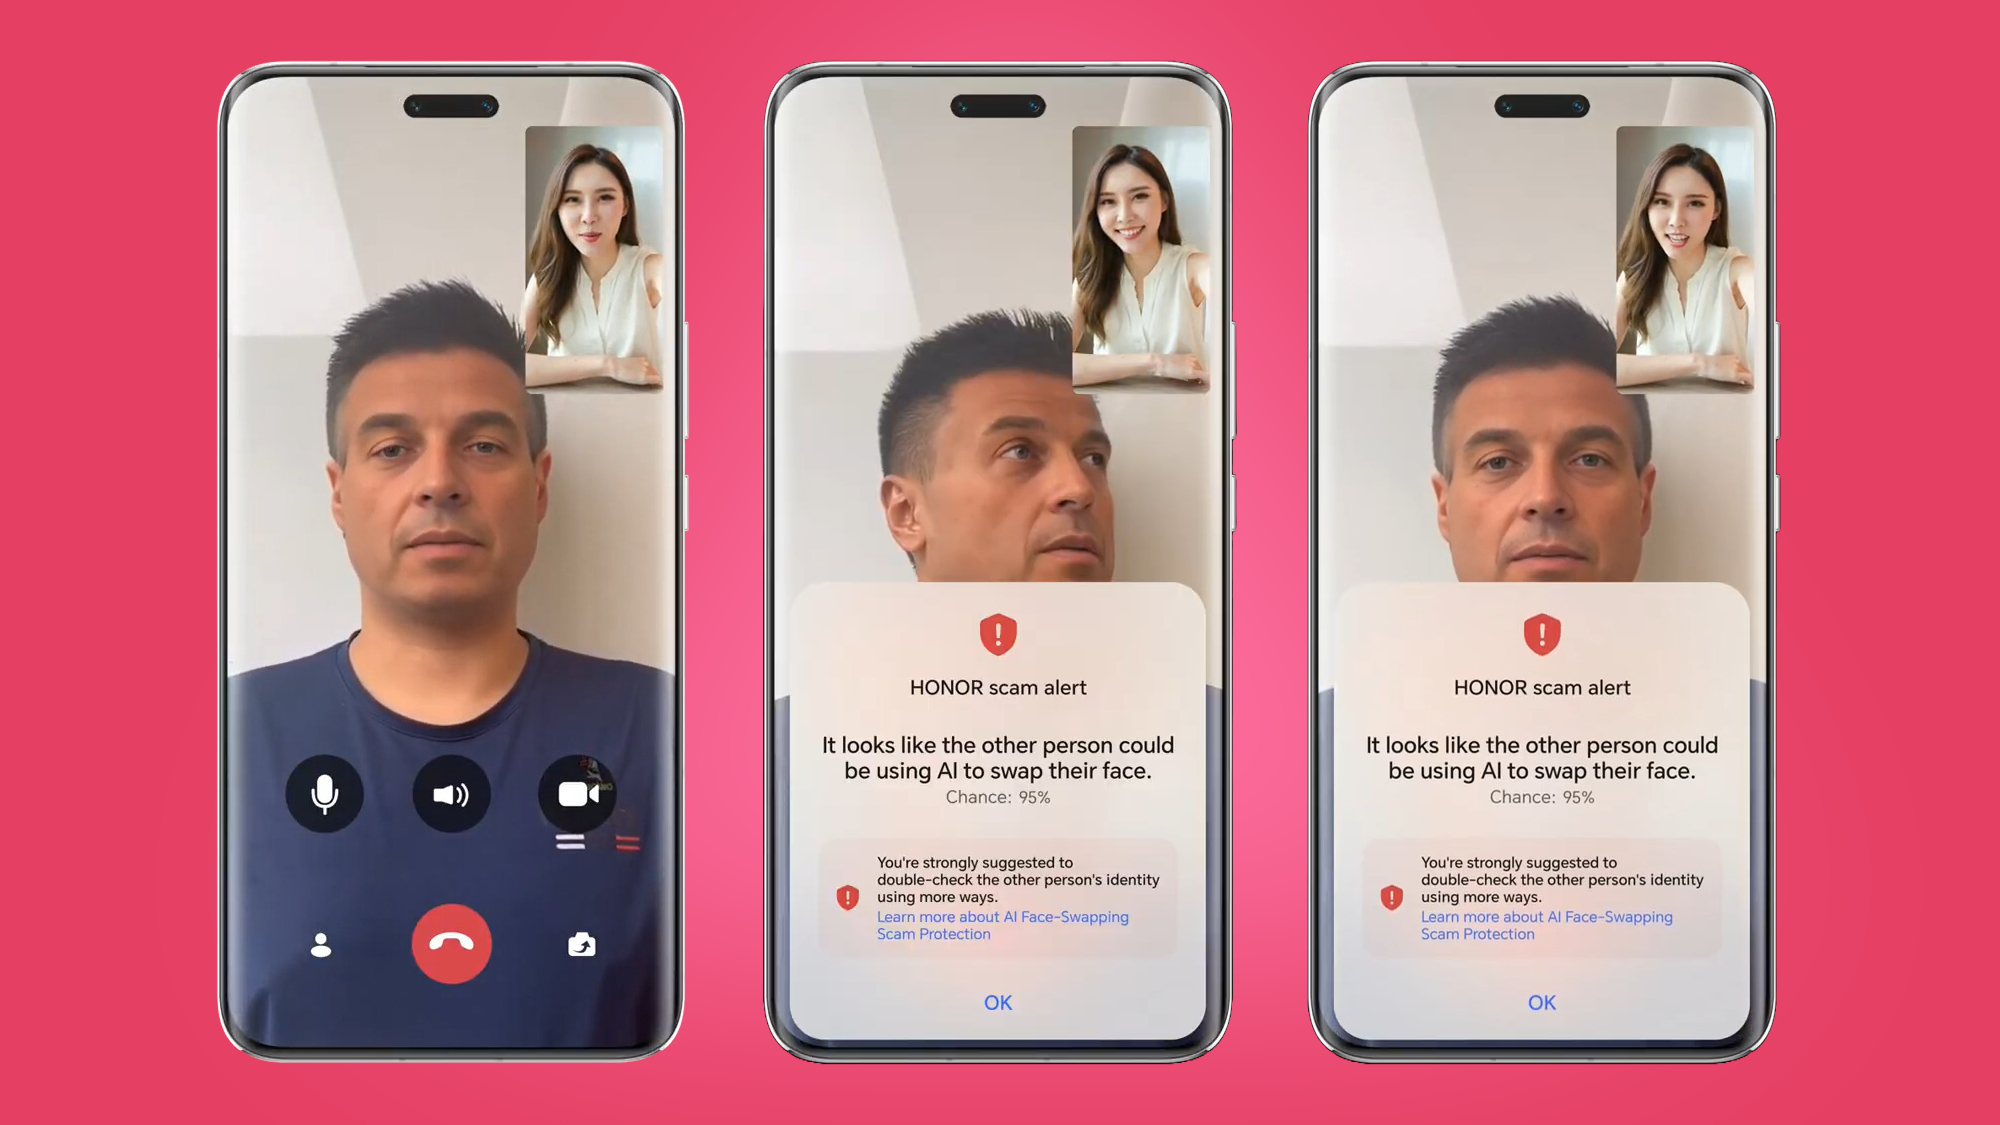 Worried about deepfakes? You should be – but Honor has an AI-powered solution